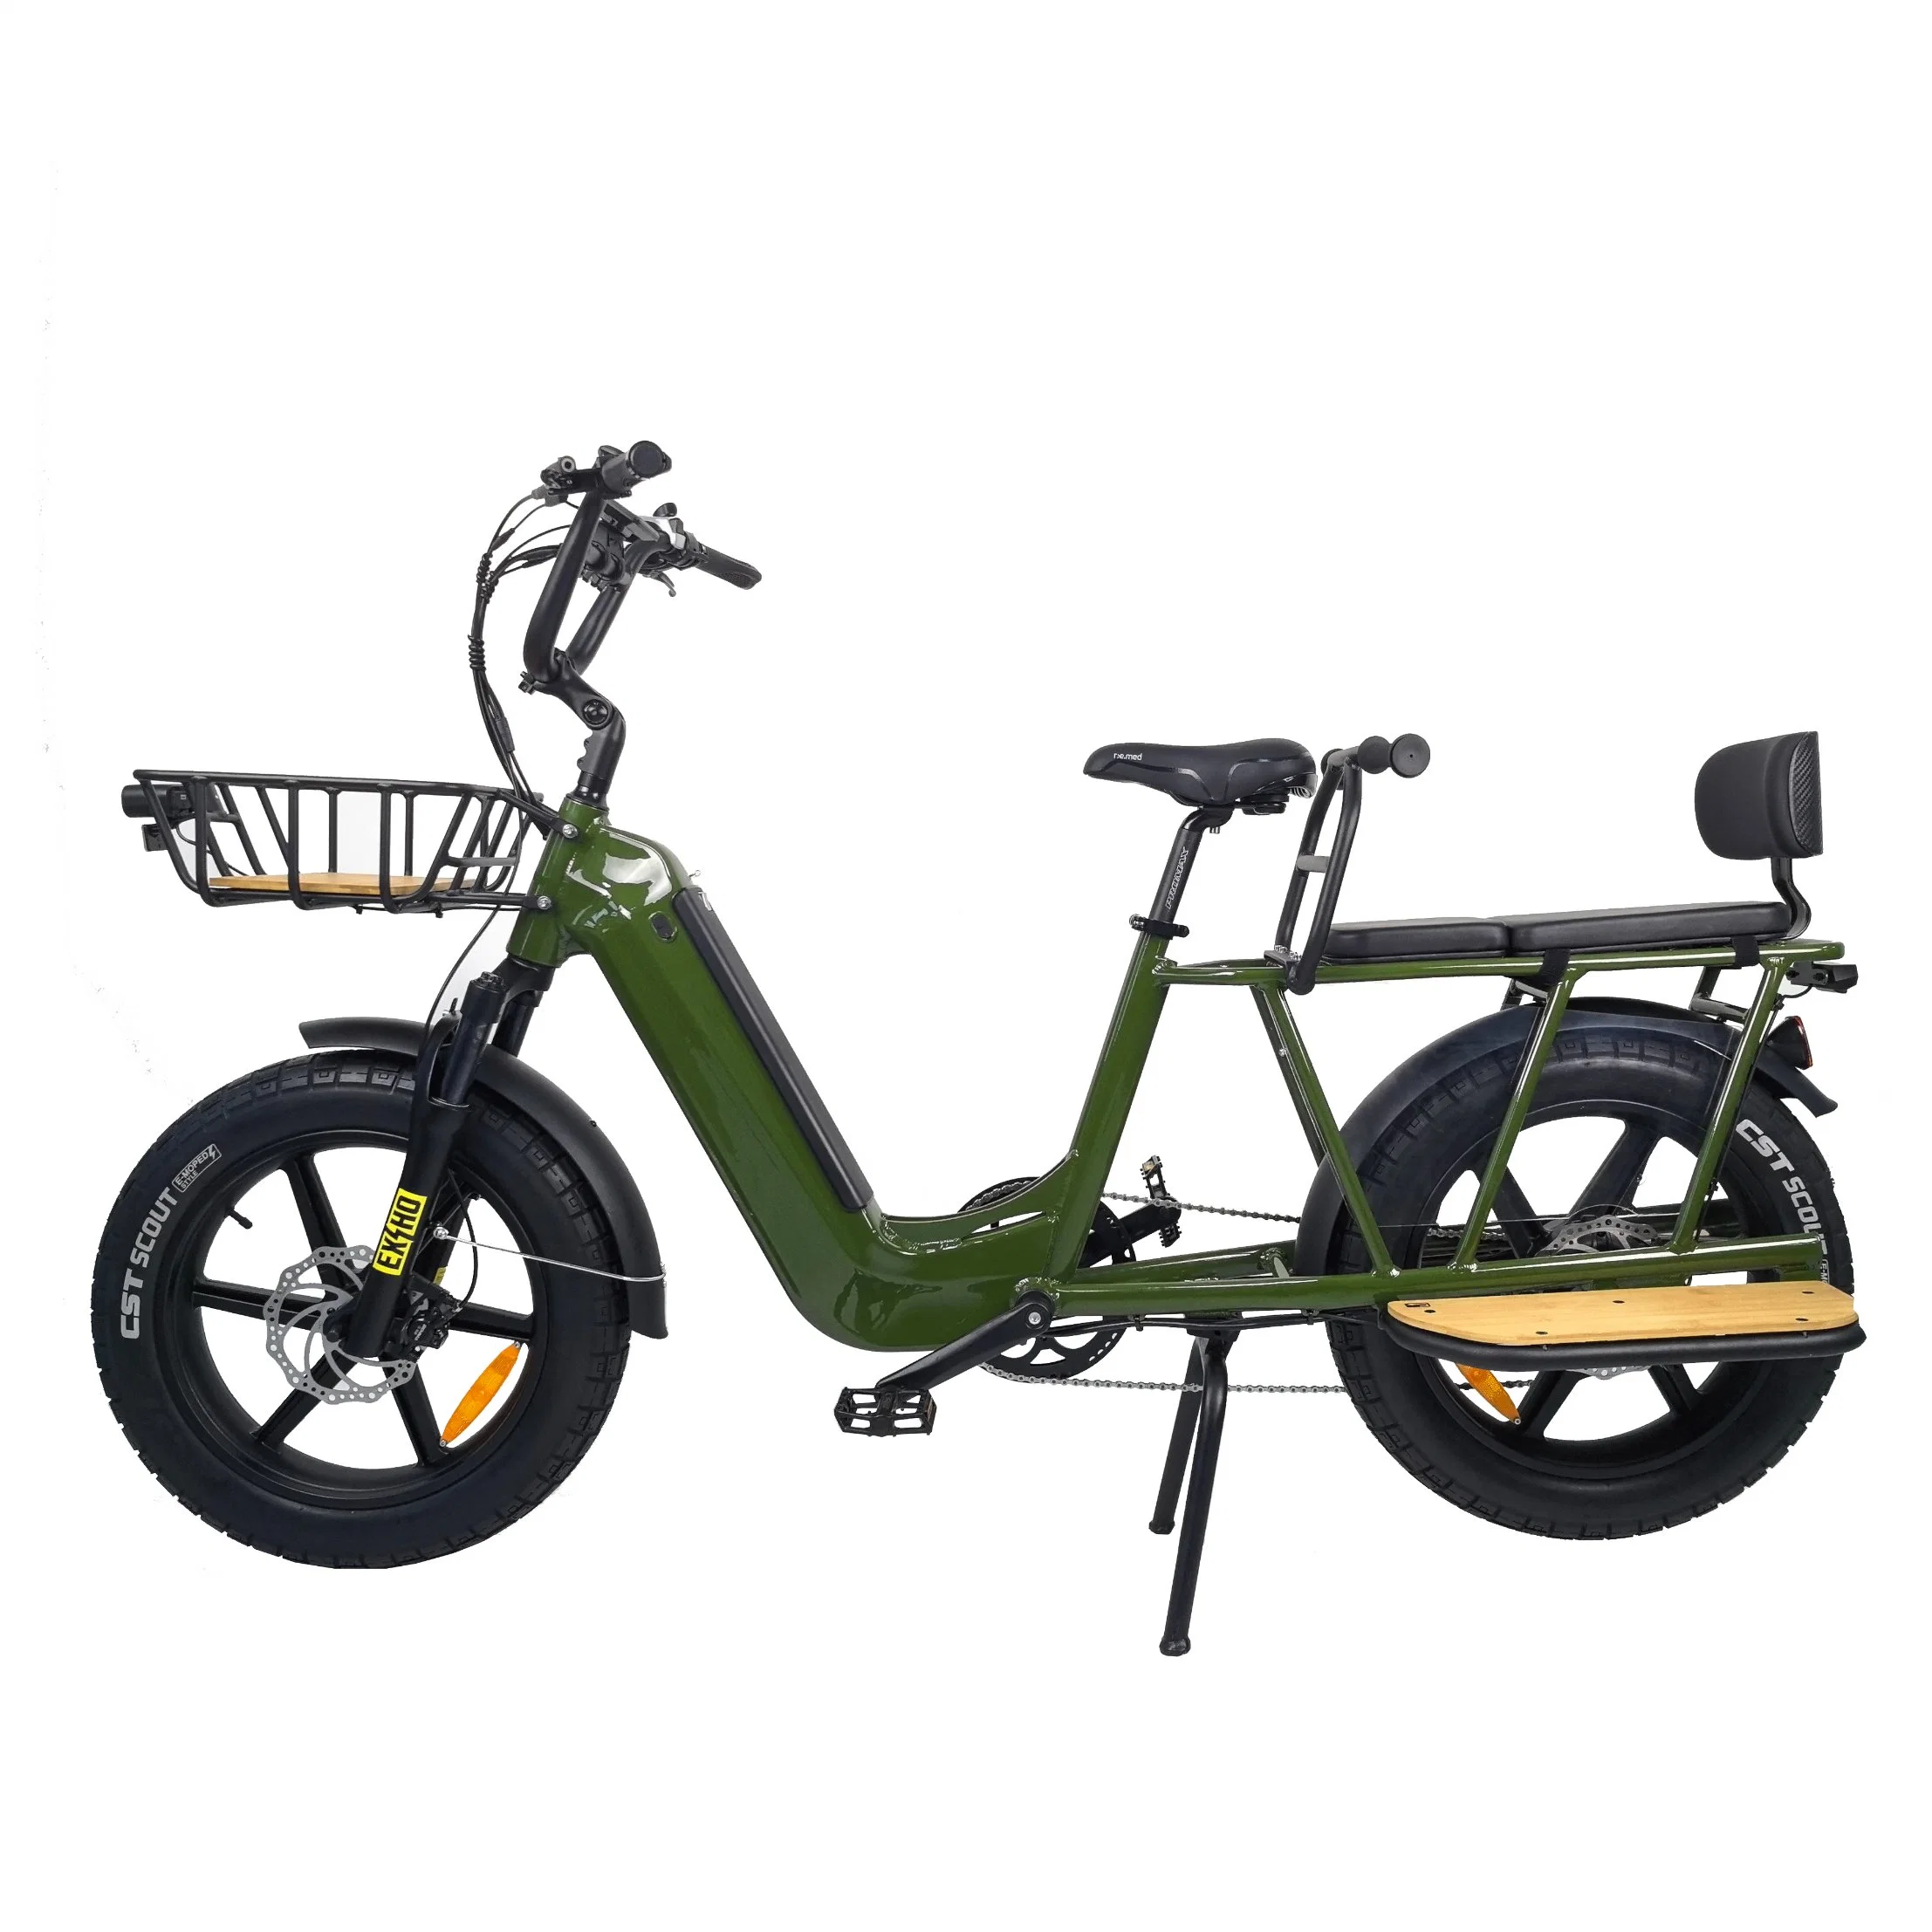 Queene/20 Inch Fat Tire Food Delivery Electric Bike Cargo Ebike 48V 750W High Speed Motor Electric Cargo Bike Utility Family